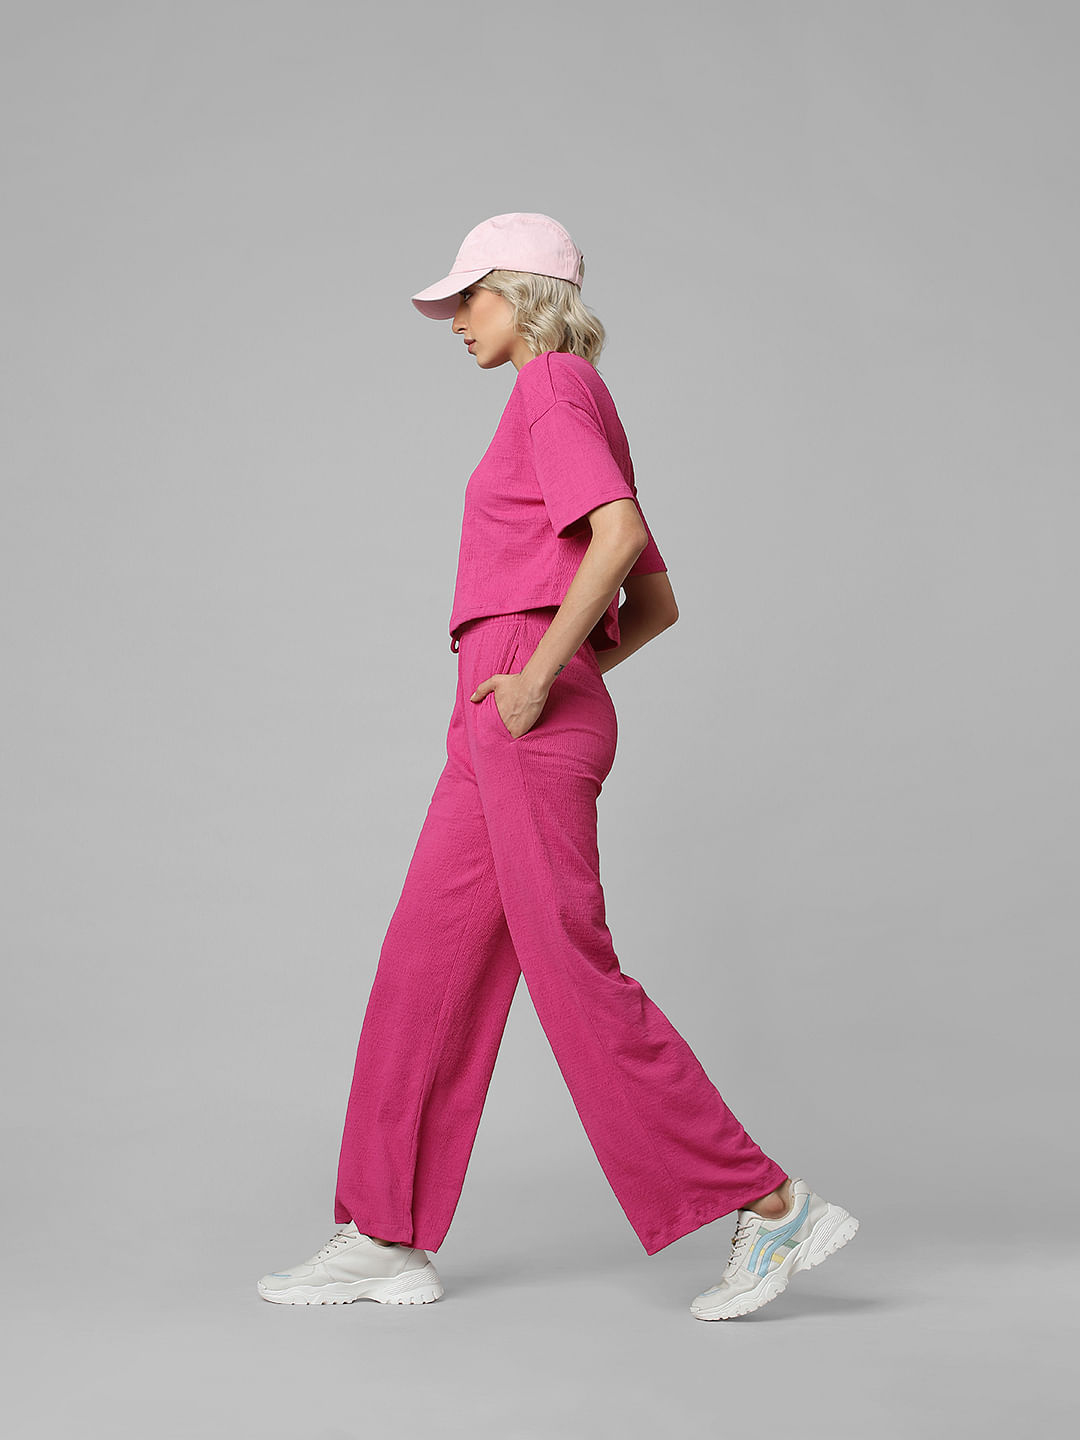 River Island Petite satin utility cargo trousers in light pink | ASOS